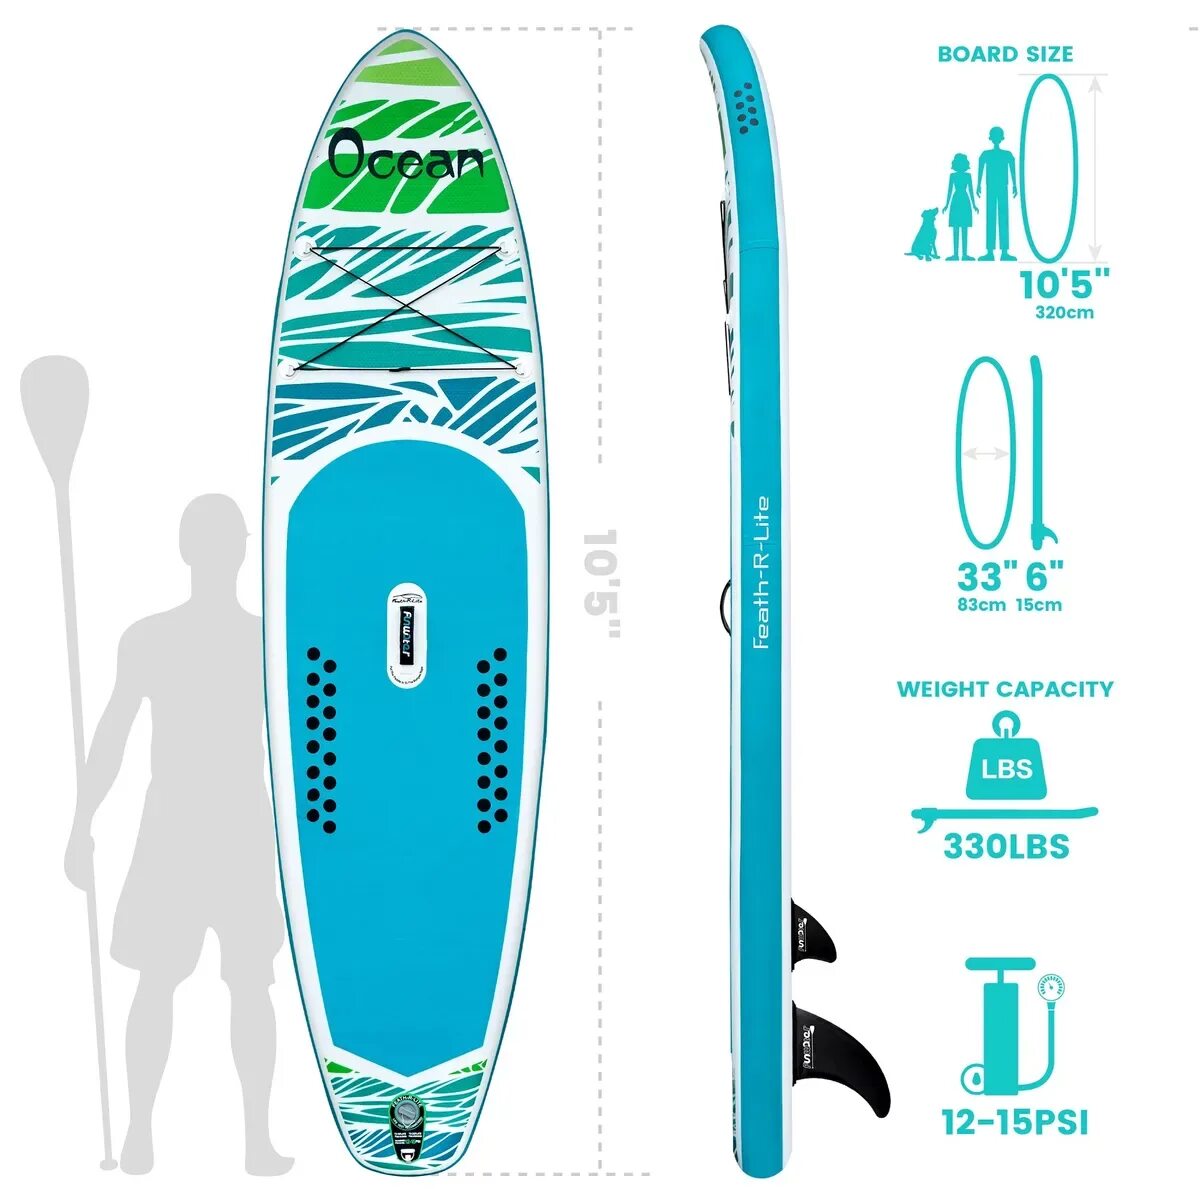 FUNWATER sup Board. Sup борд FUNWATER Tiki 10'6. FUNWATER Ocean 10.6. Feath-r-Lite sup. Feath r lite